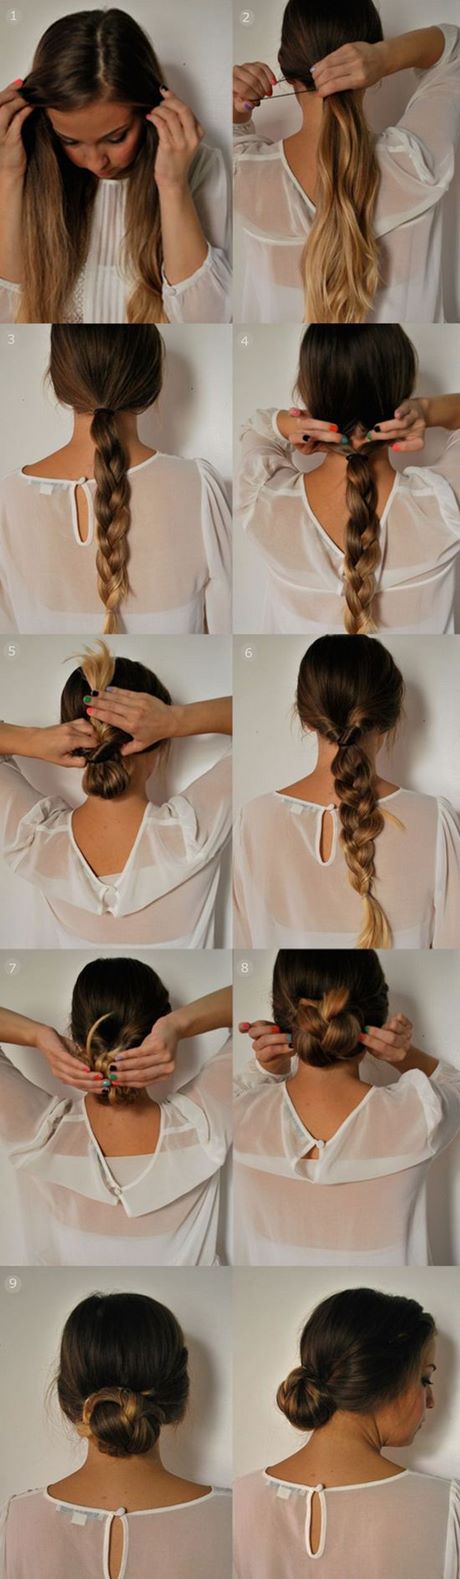 Quick easy updos for short hair quick-easy-updos-for-short-hair-01_6